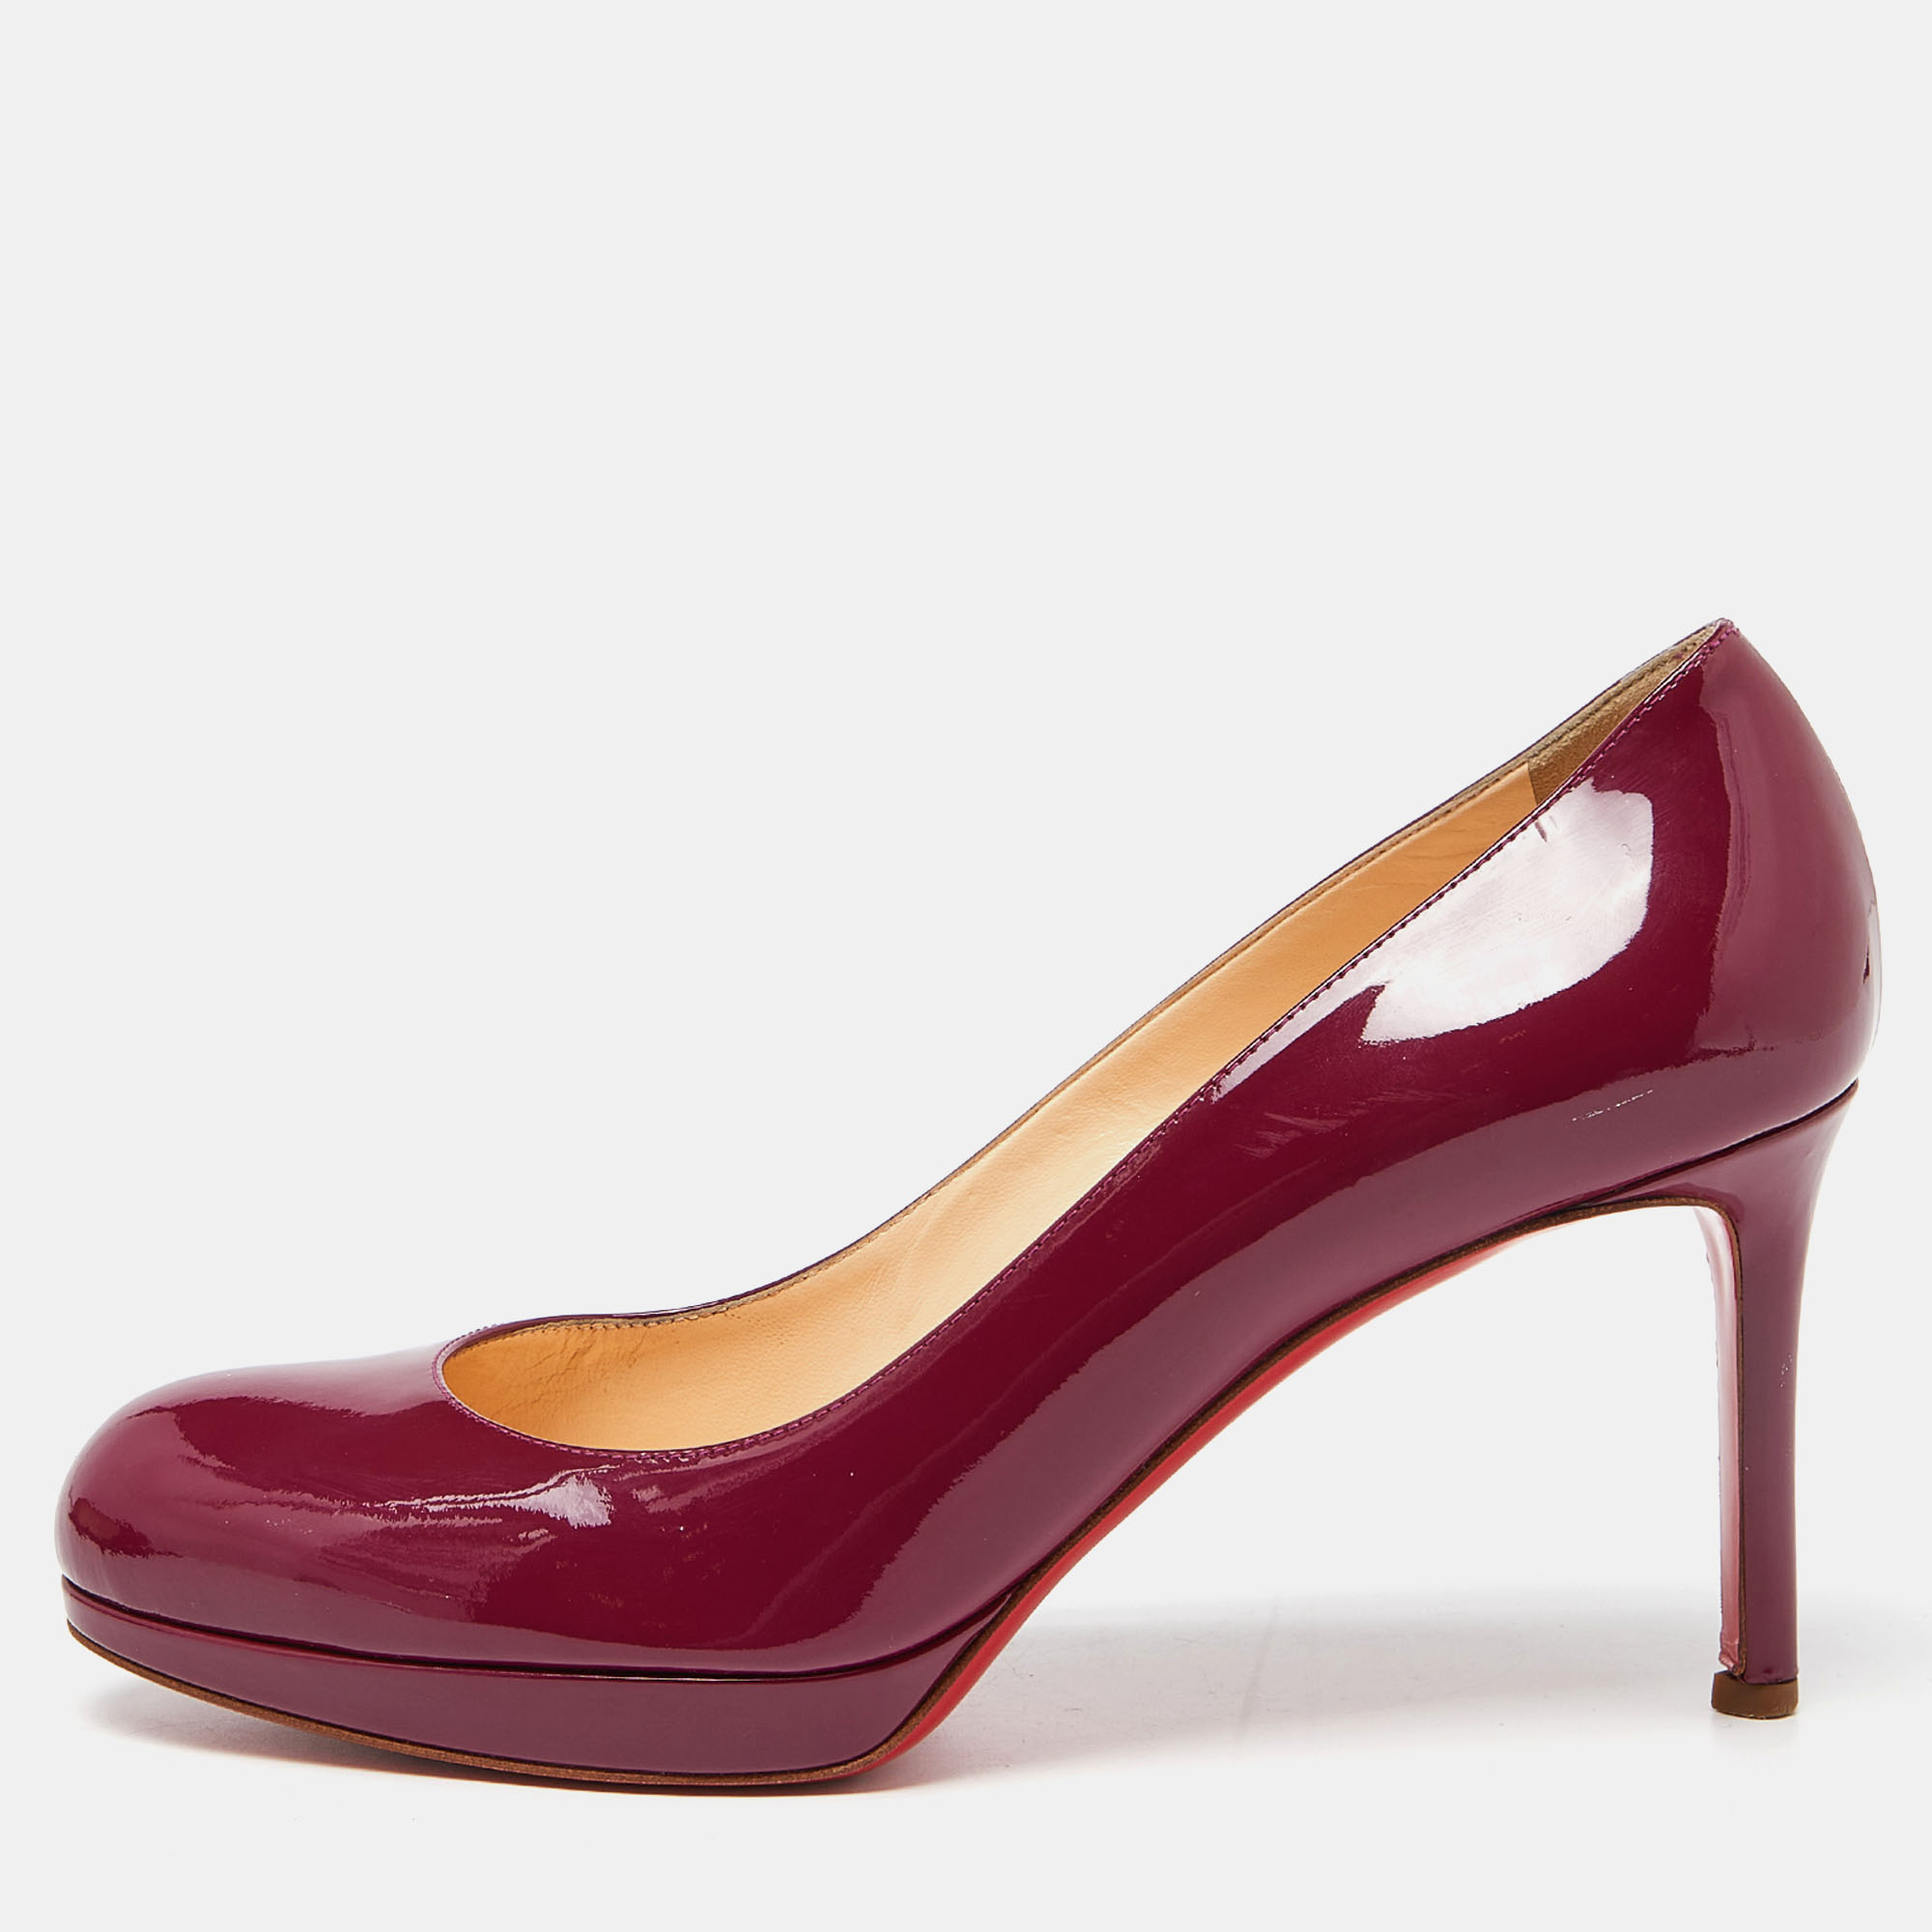 Christian louboutin purple patent leather new simple pumps size 38